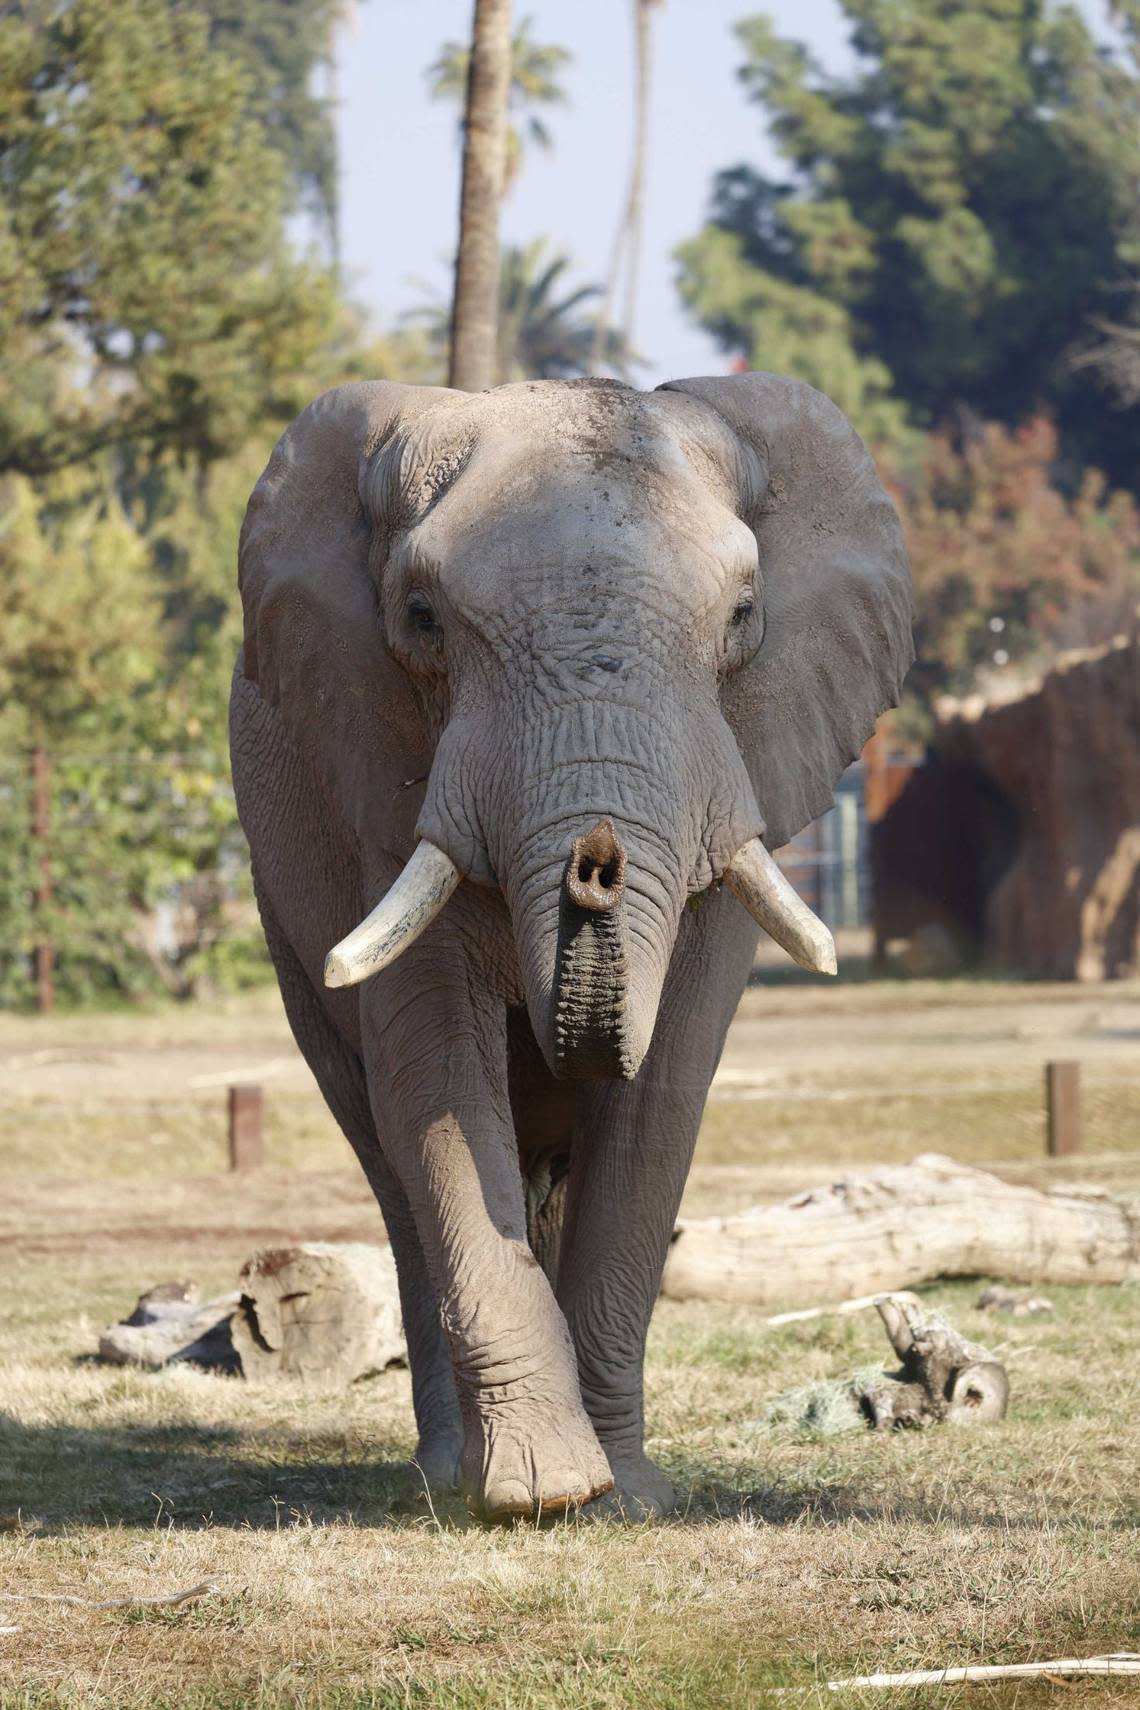 Mabu is the newest member of the African elephant herd at Fresno Chaffee Zoo.